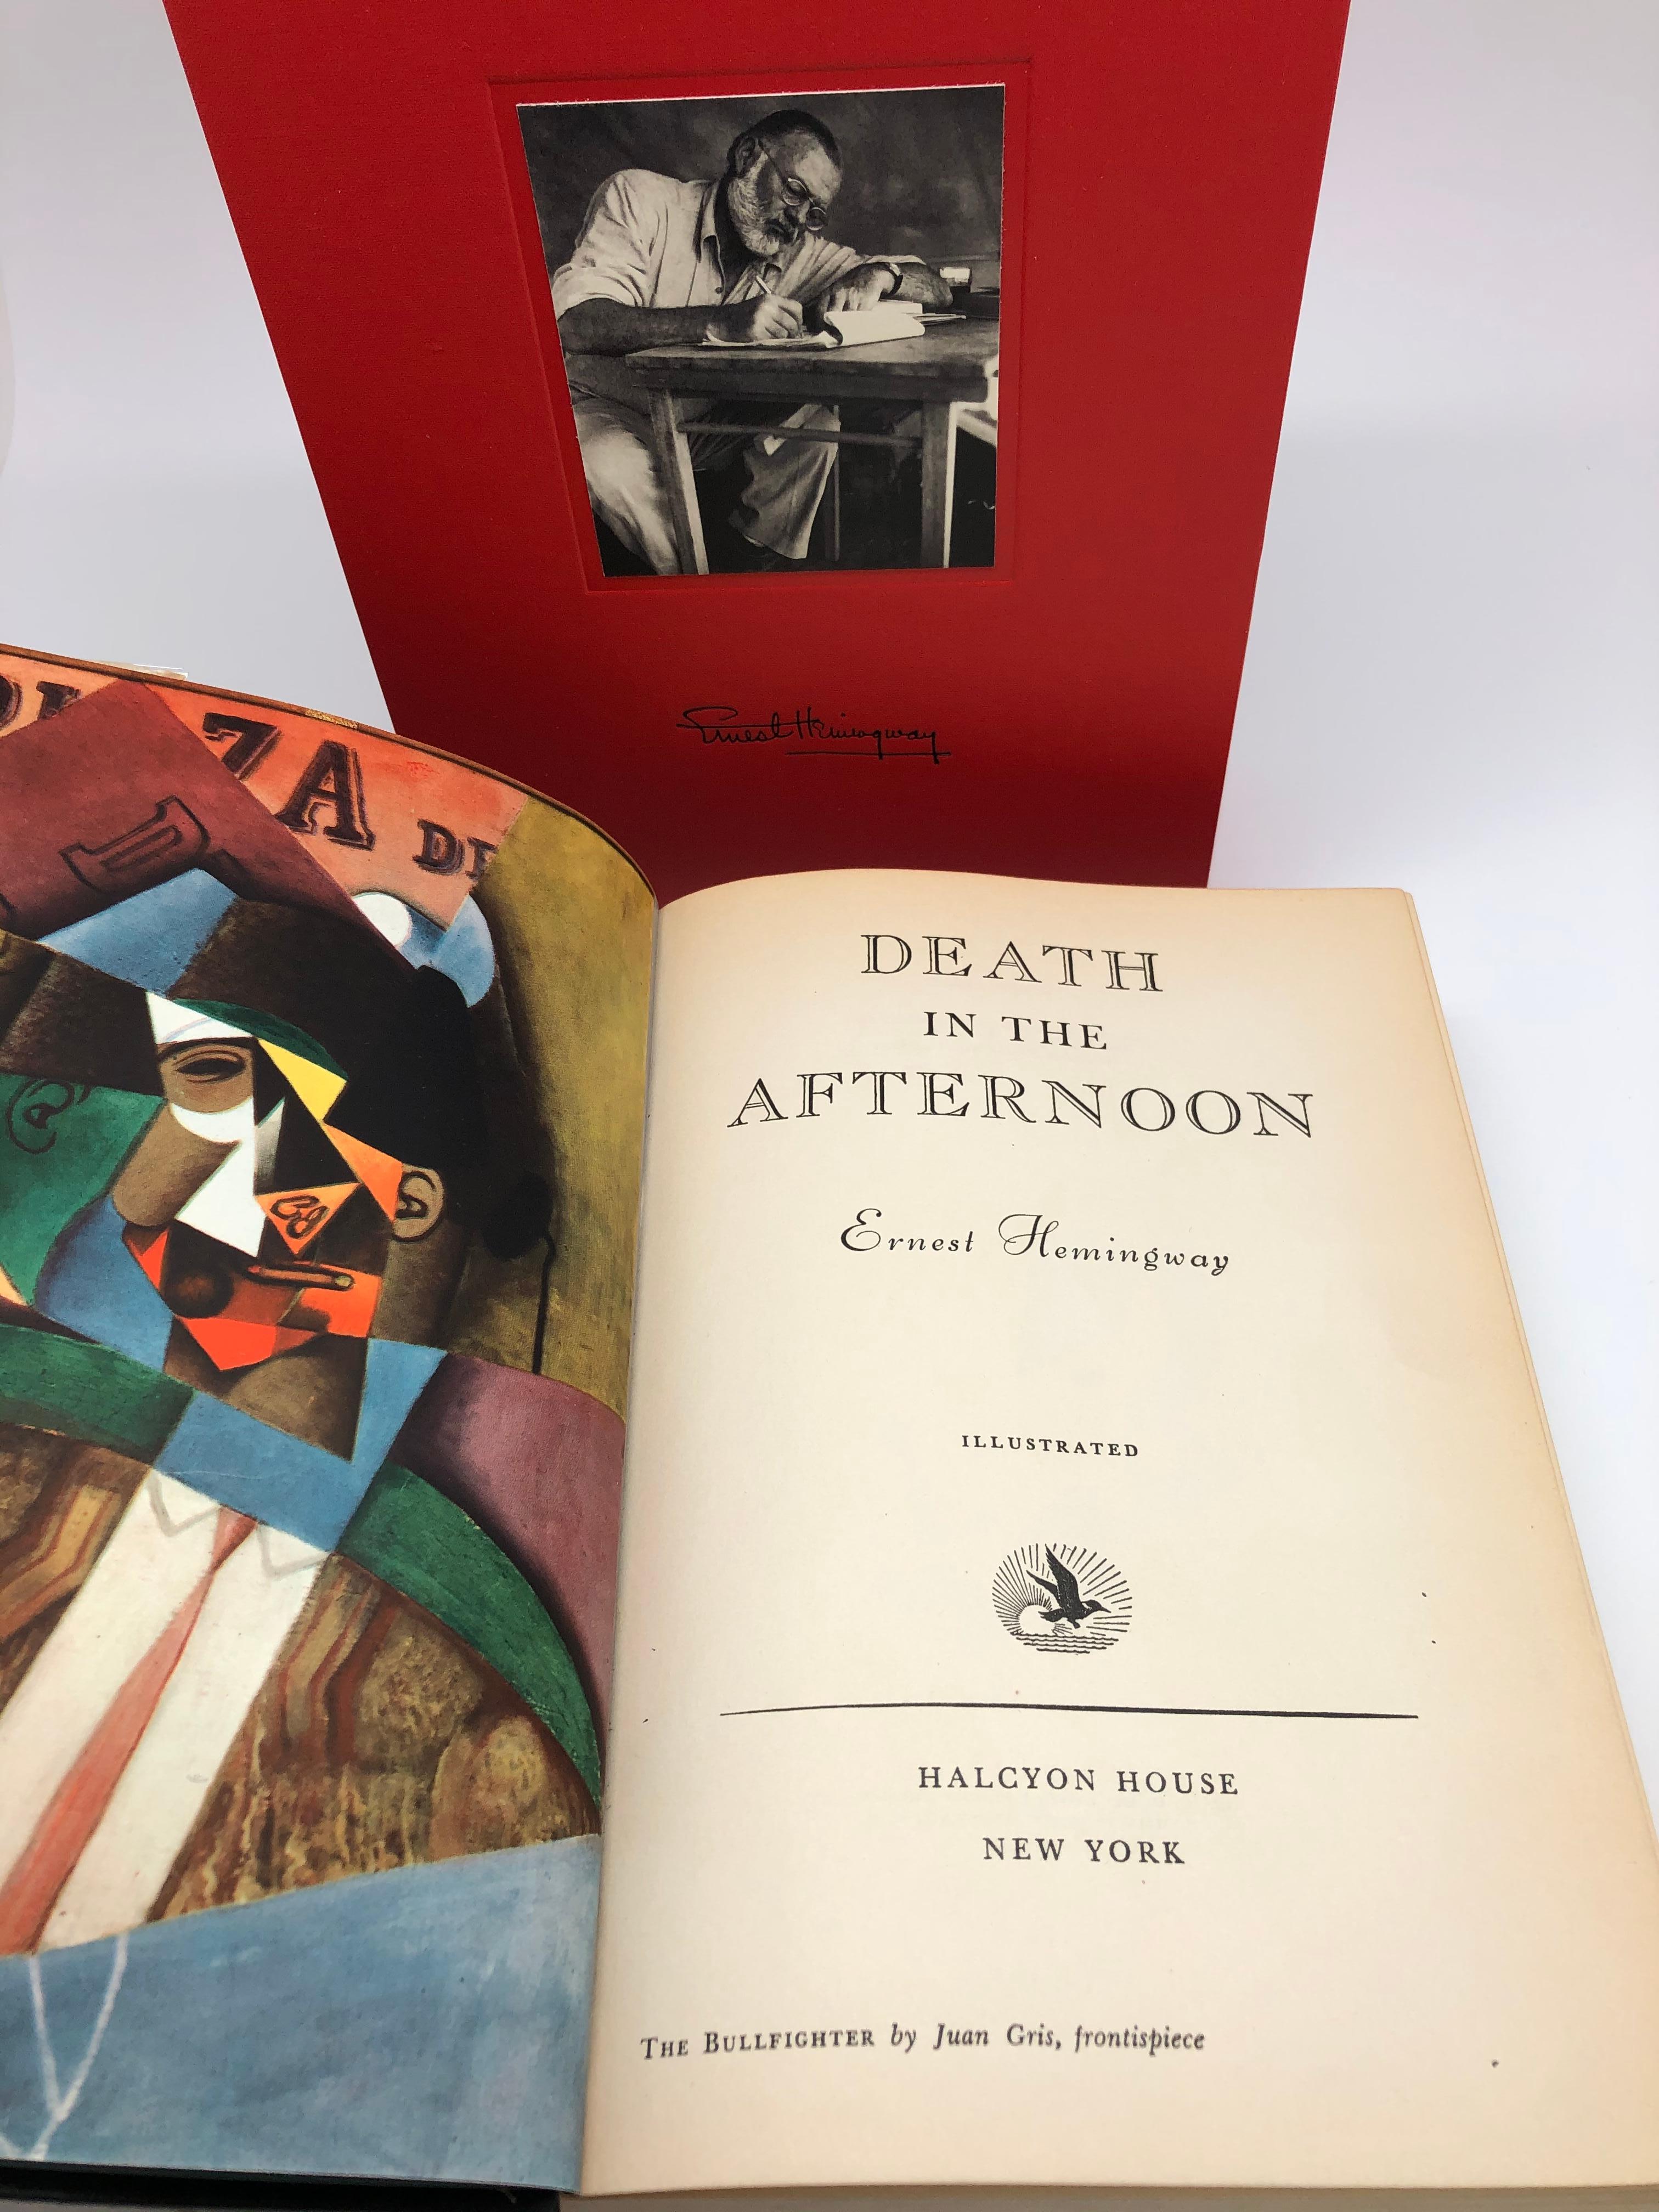 Hemingway, Ernest, Death in the Afternoon. New York: Halcyon House, 1932. Original dust jacket. Housed in a custom archival slipcase.

Presented is the Halcyon House edition of Ernest Hemingway’s dramatic novel Death in the Afternoon. Charles